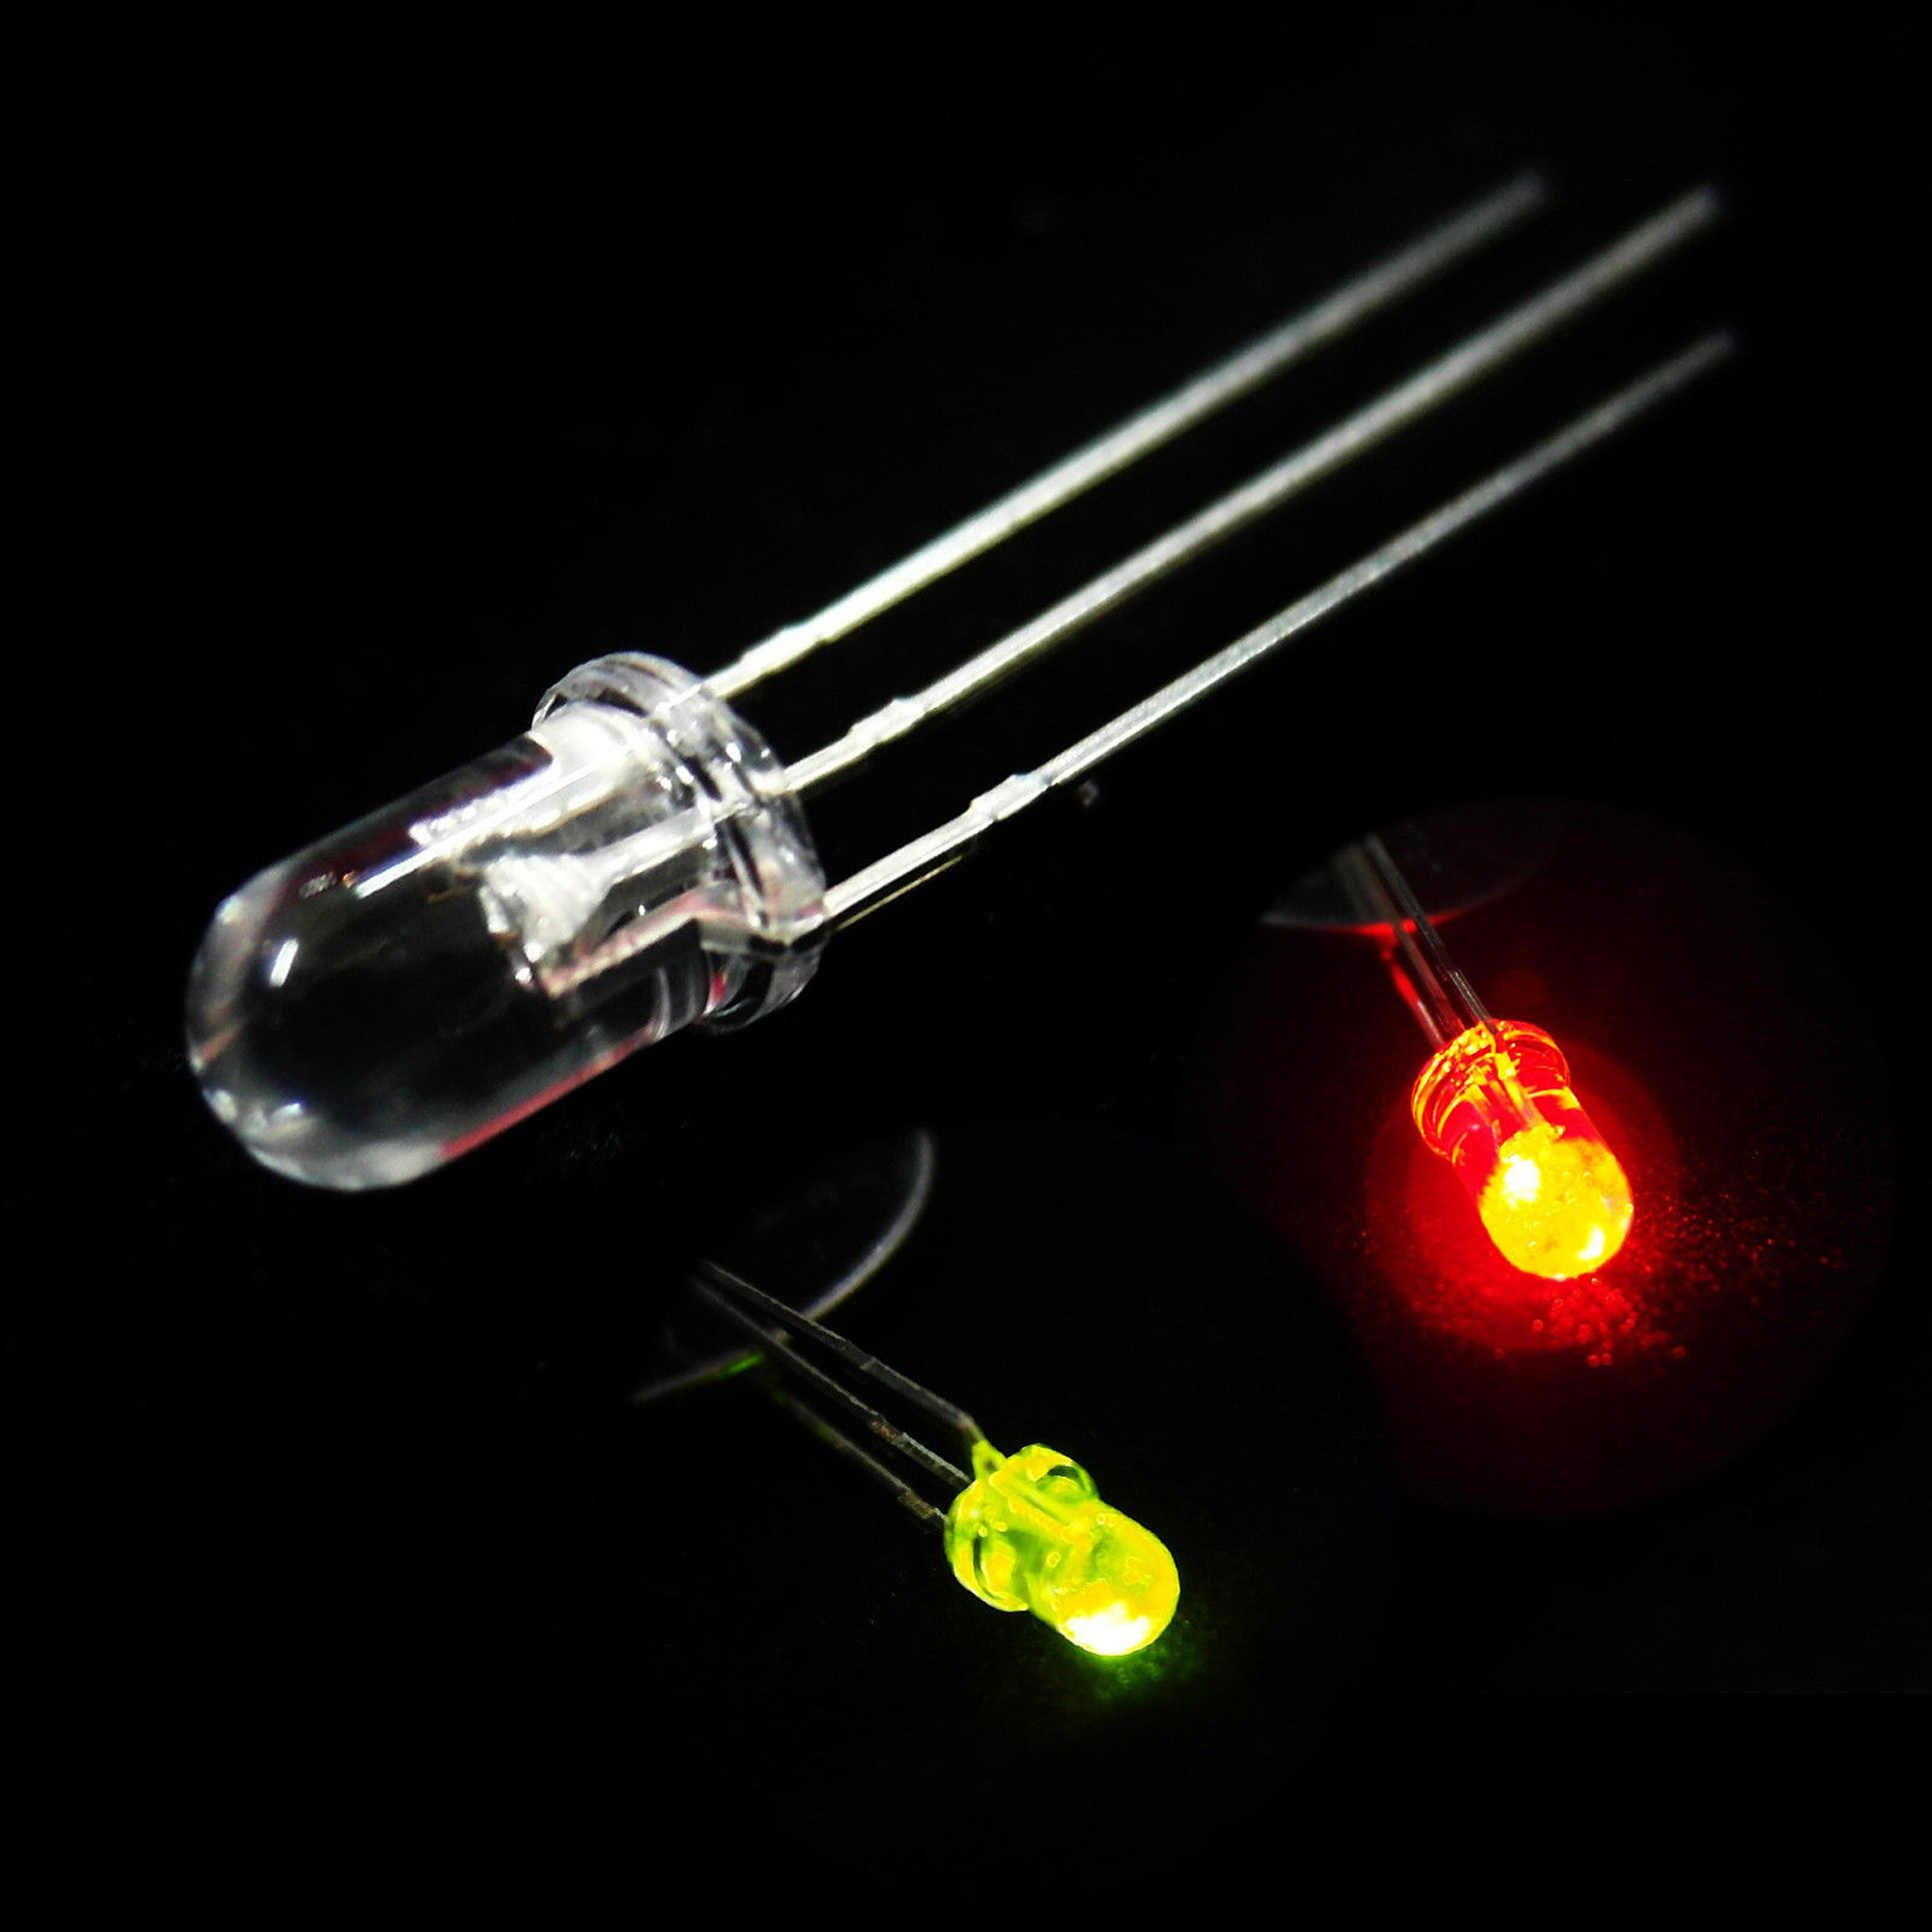 Светодиод 3 мм. Led Red Green Dual Color 5mm common cathode. Led Diode Red Green Radial discrete Dual Color 5mm common cathode. Xp50 светодиод. Светодиоды 3v общий анод.